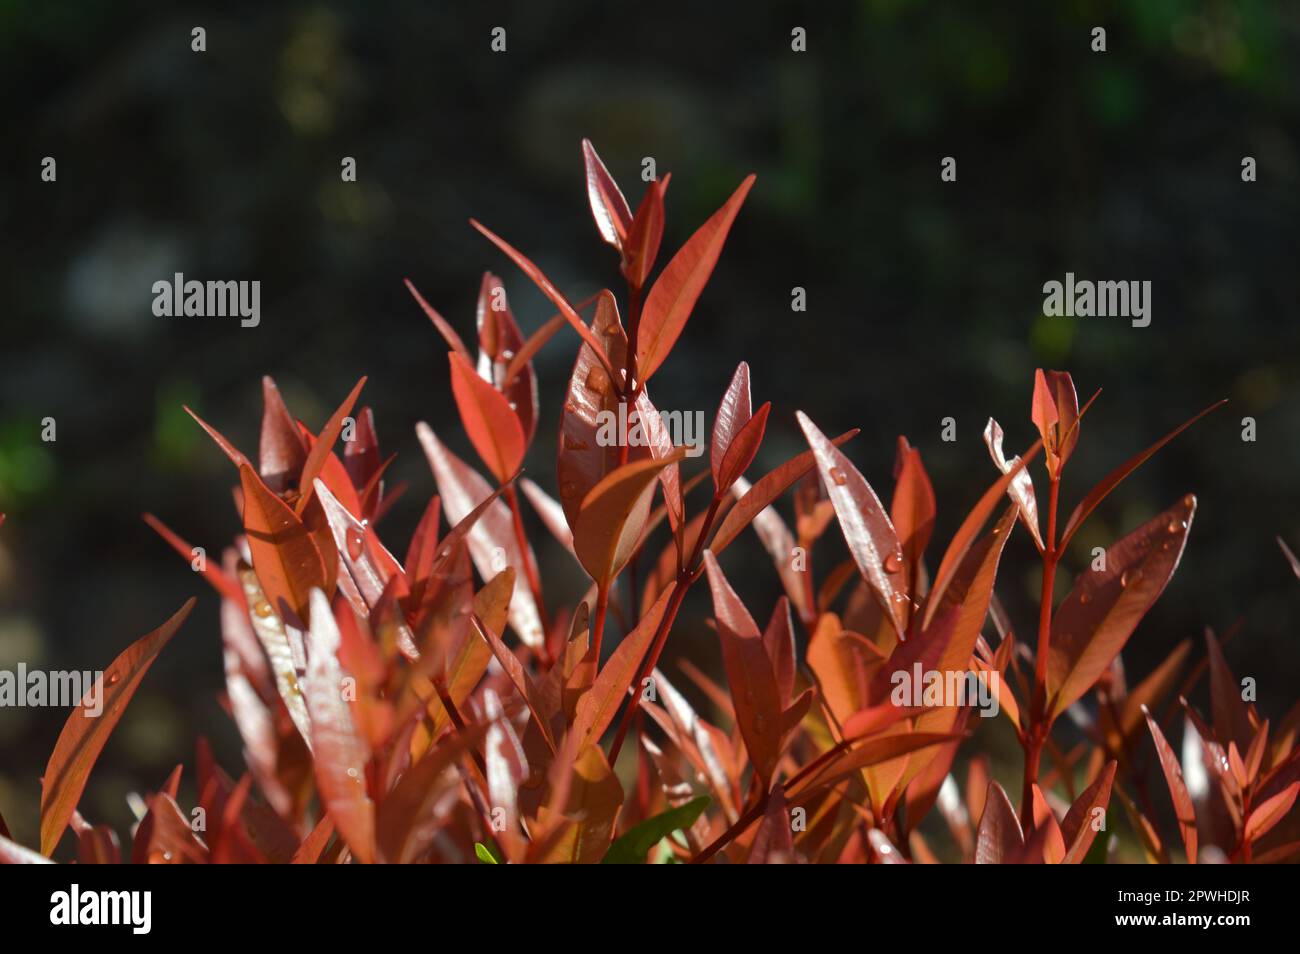 selective focus, narrow depth of field, ornamental plant with scientific name syzygium australe growing in gardens, native to eastern Australia Stock Photo